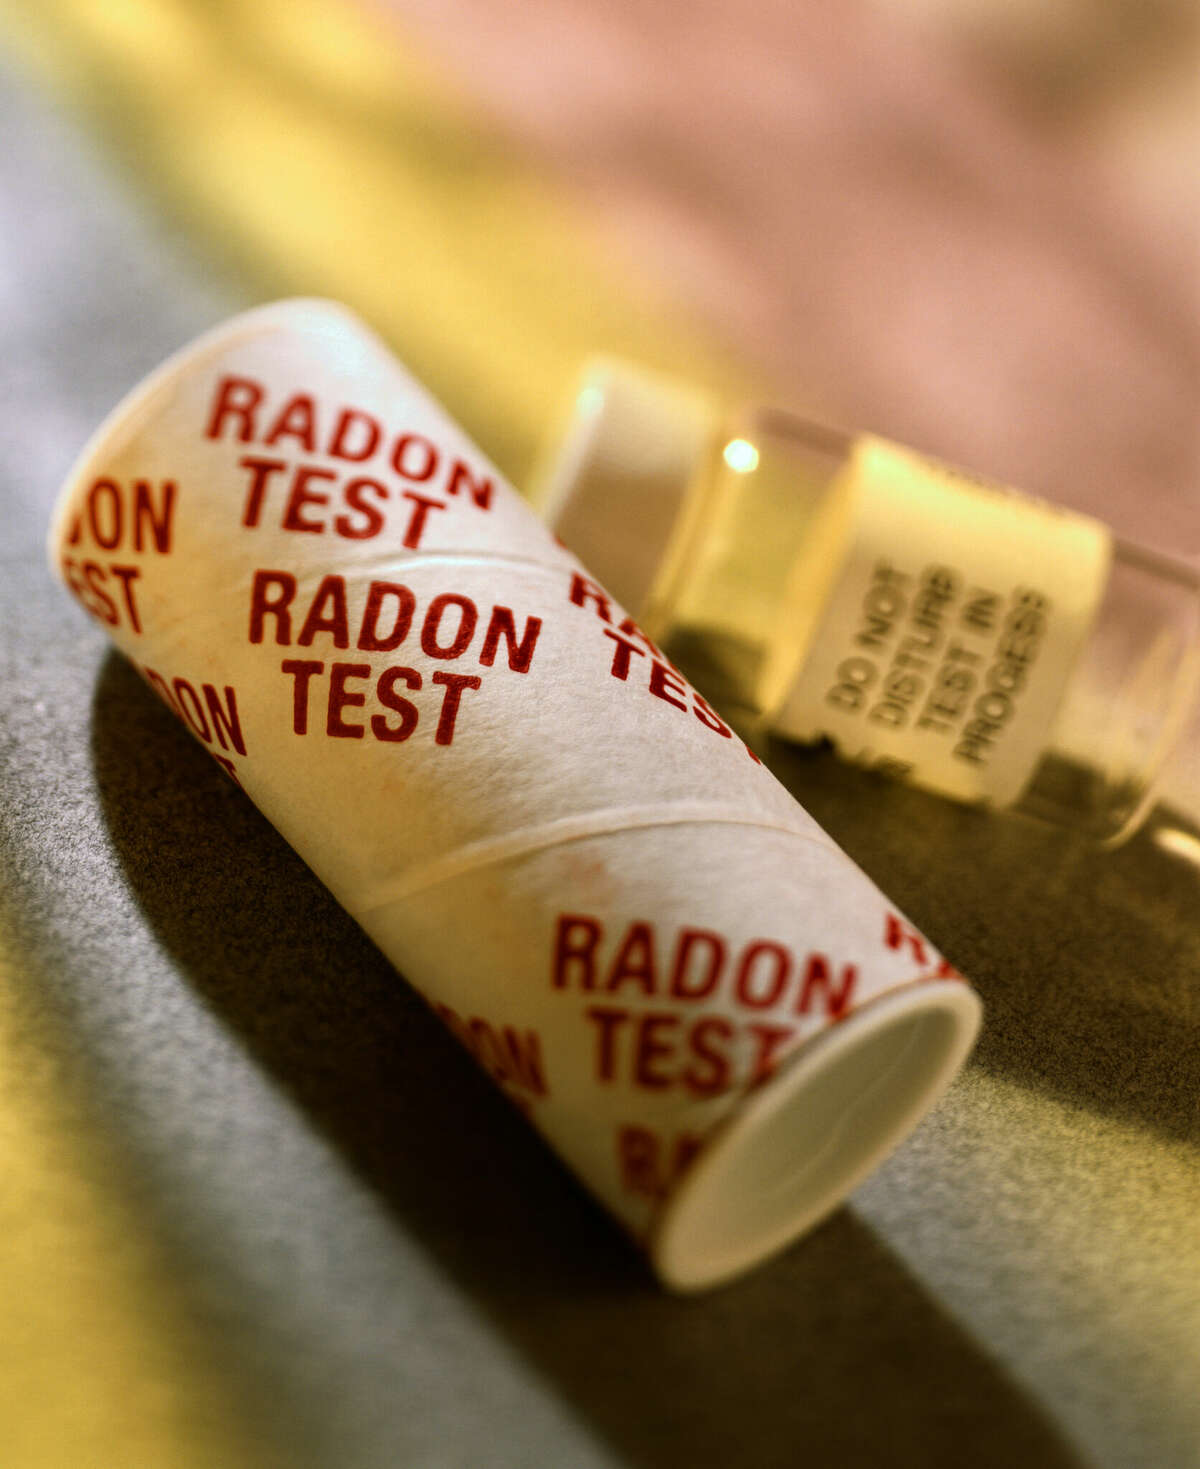 District Health Department #10 is offering free radon test kits throughout January.